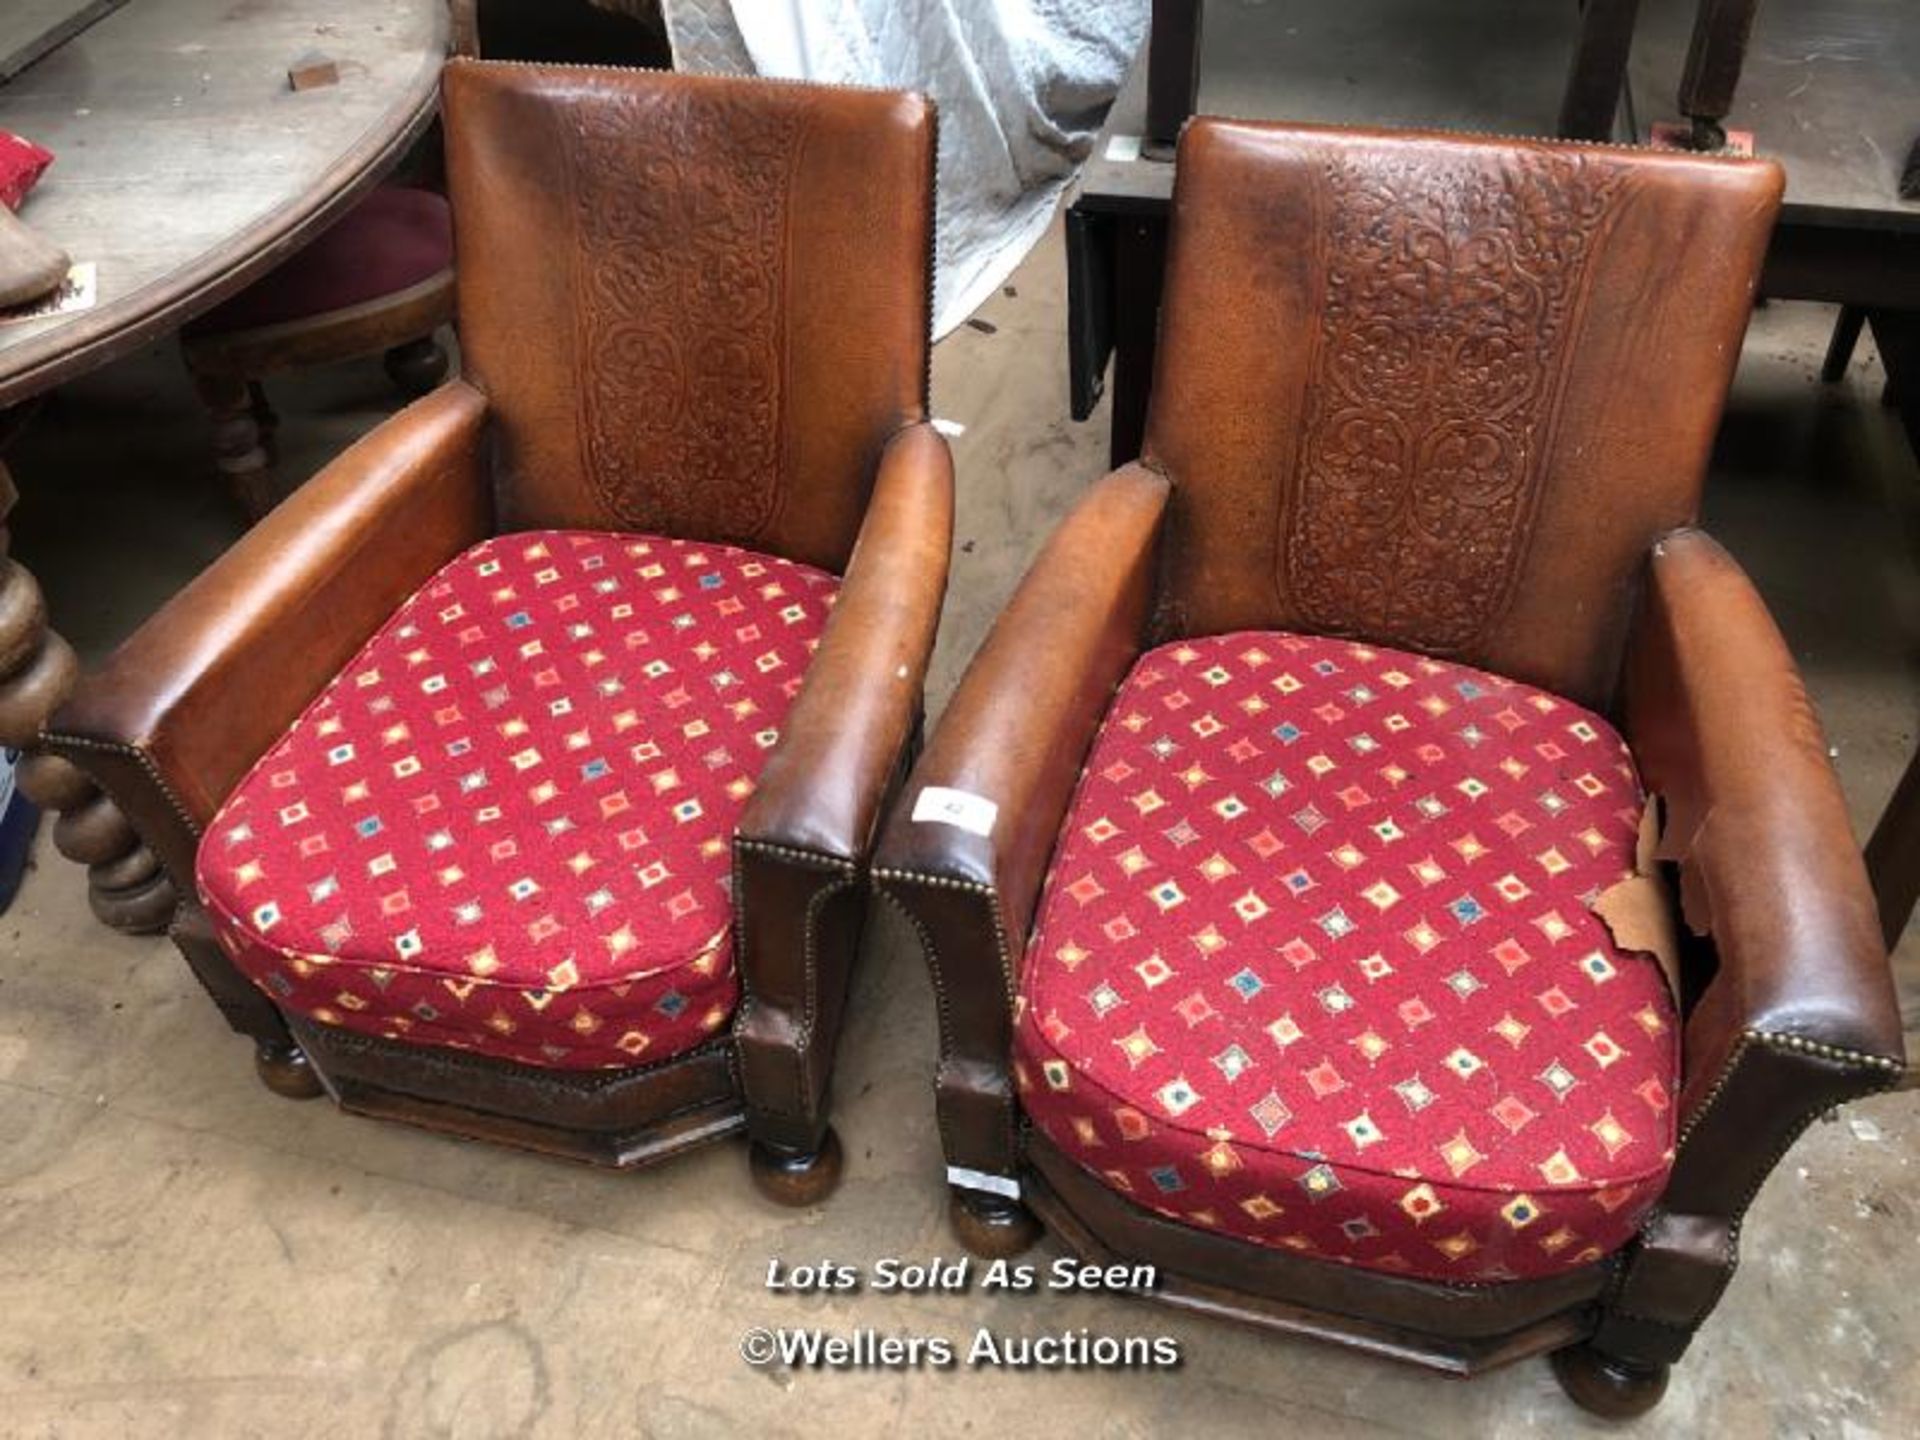 PAIR OF 19TH CENTURY LEATHER CLUB CHAIRS, IN NEED OF RESTORATION, 29 X 30 X 33 INCHES / LOCATED AT